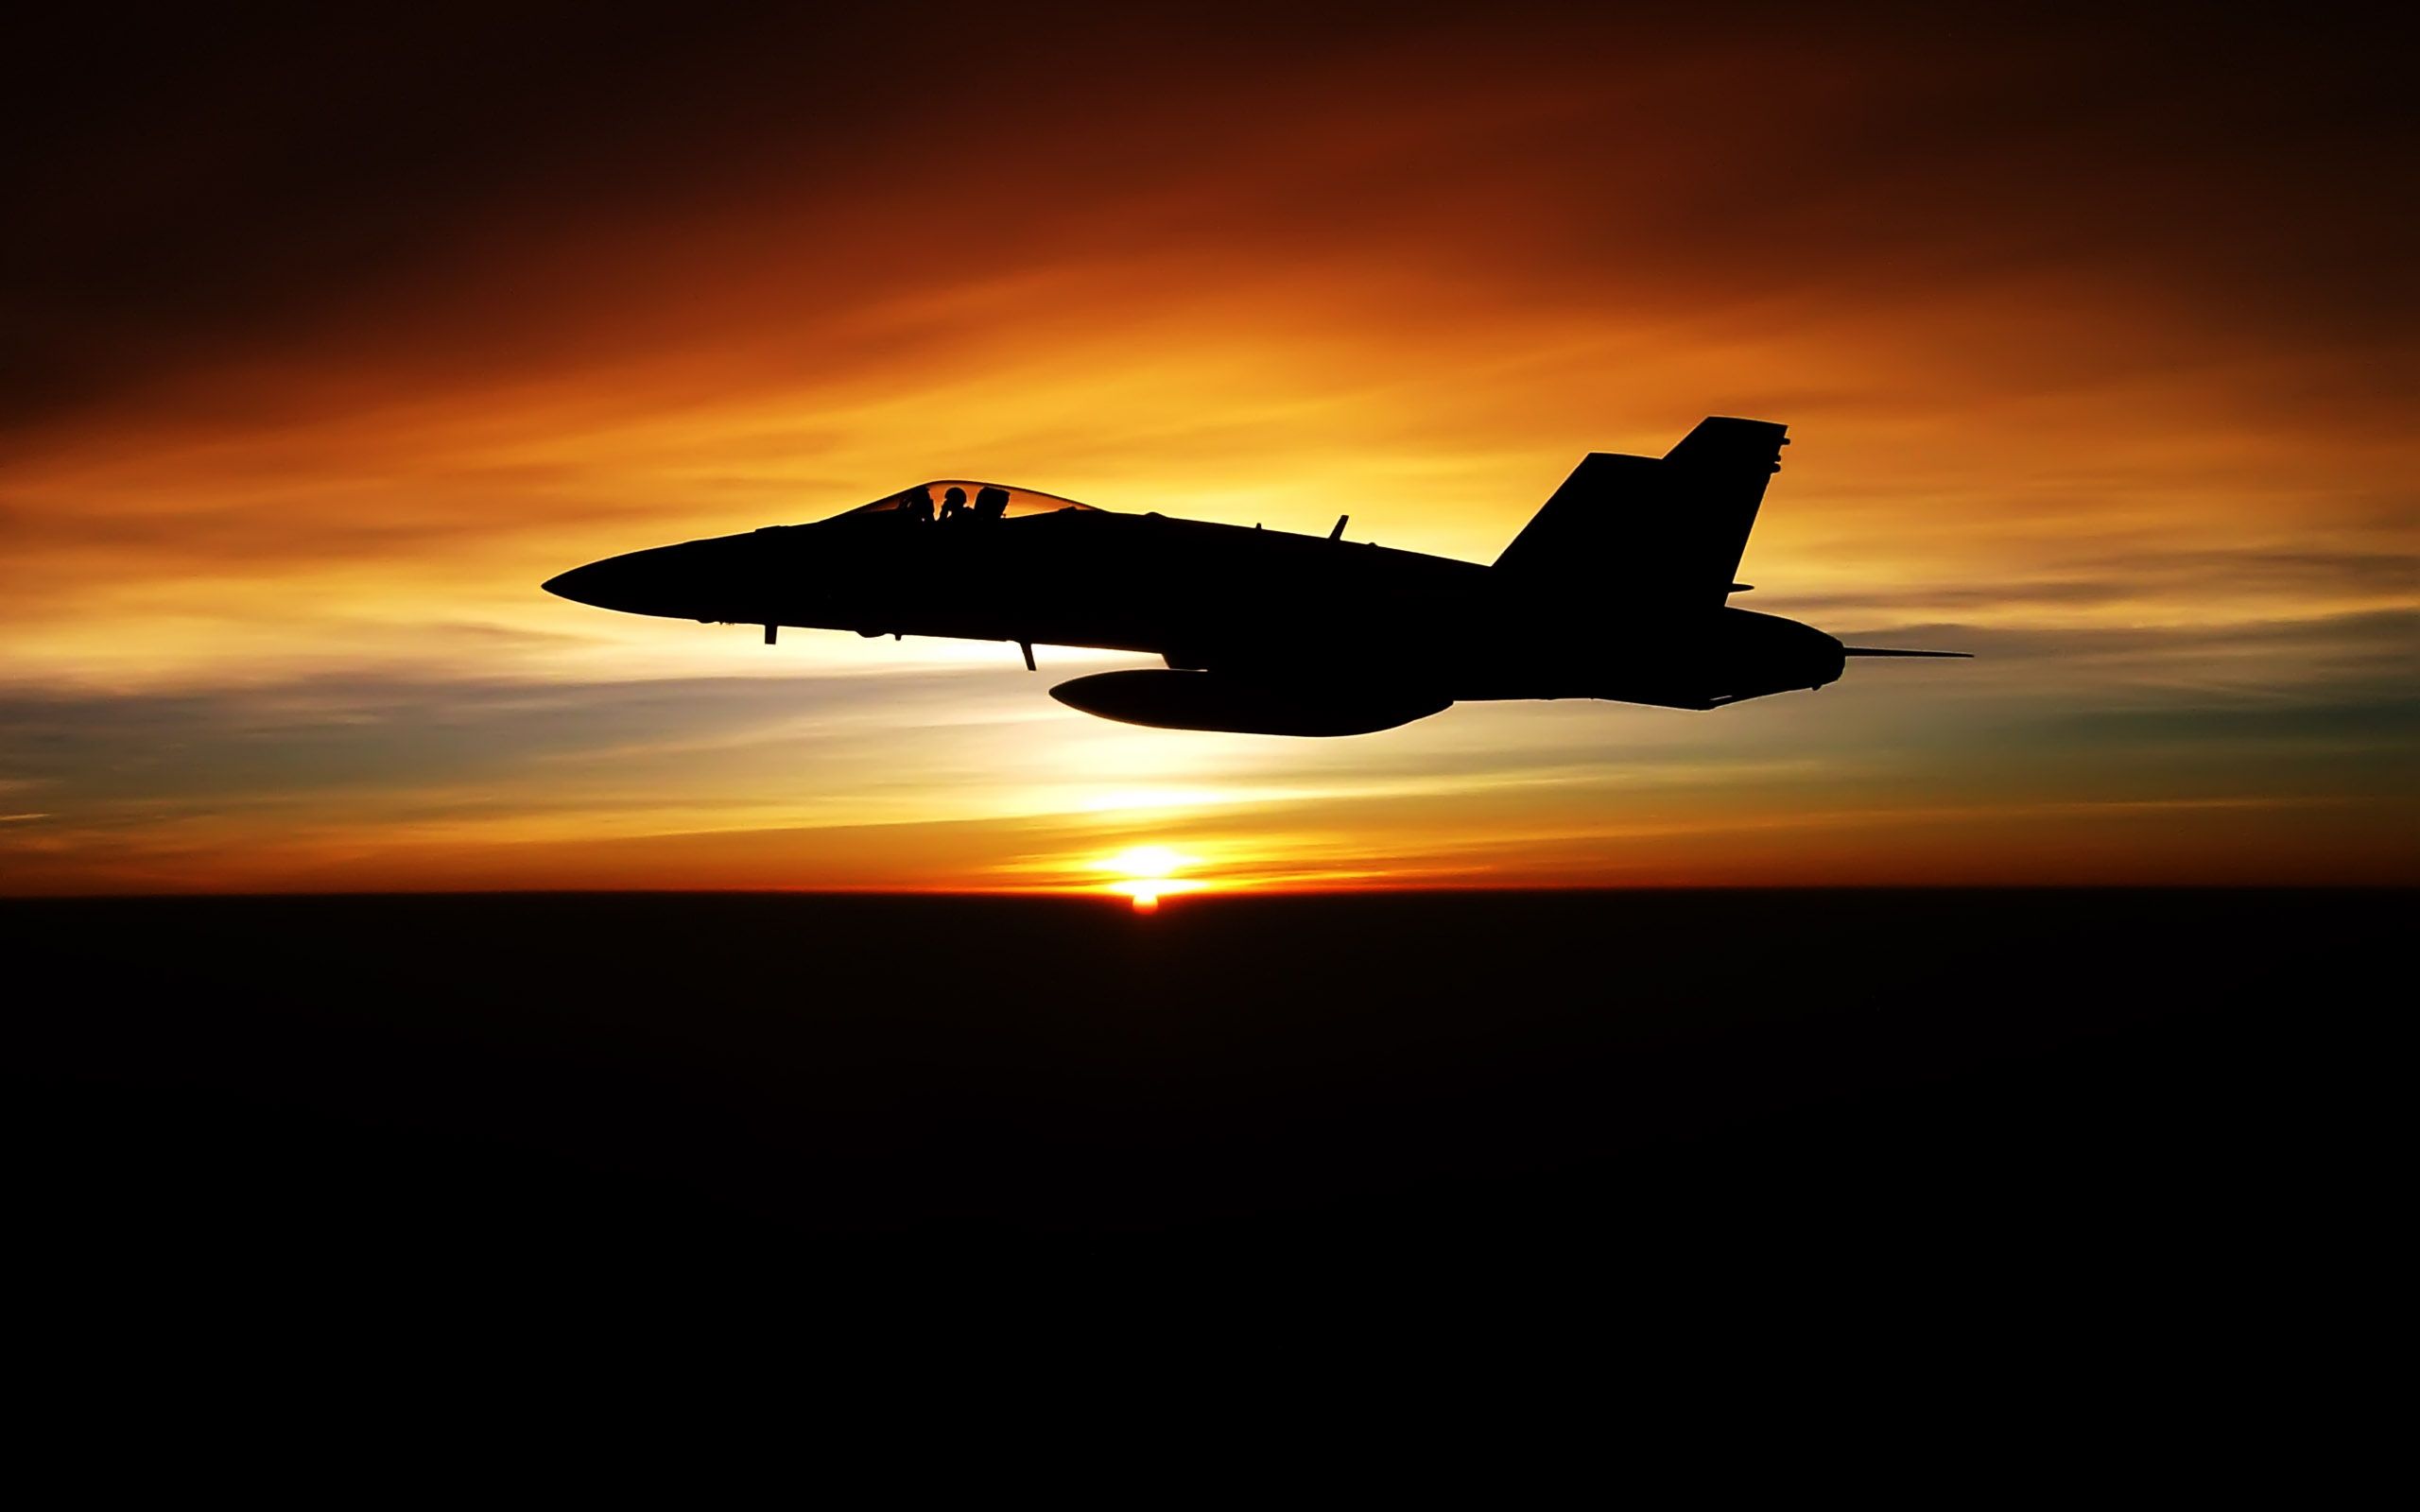 Plane Sunset, HD Planes, 4k Wallpaper, Image, Background, Photo and Picture